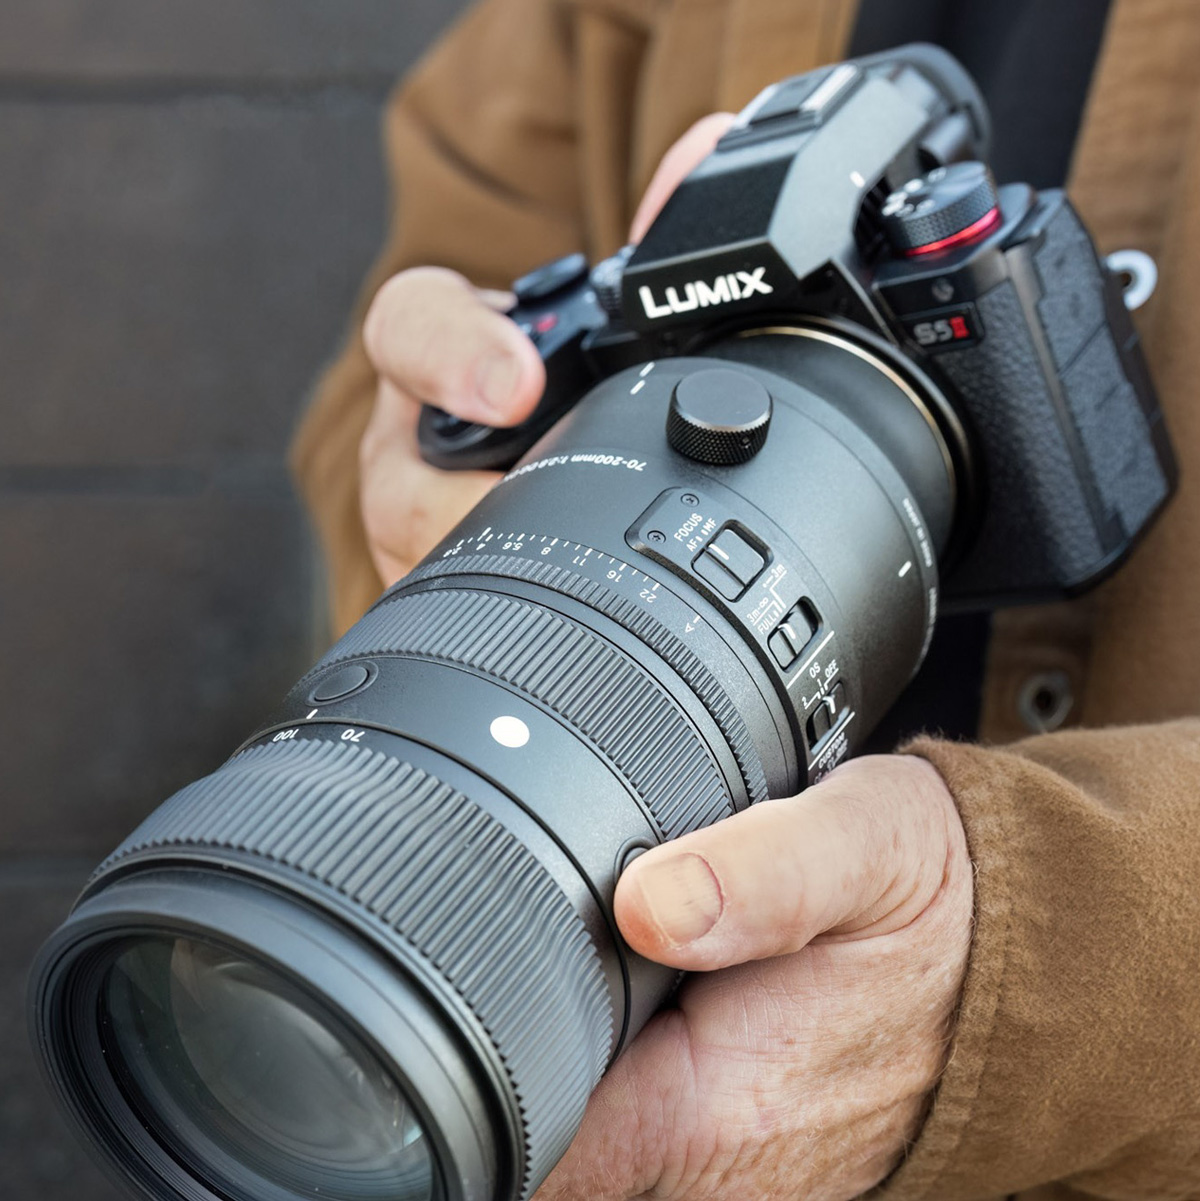 Sigma 70-200mm f/2.8 DG DN OS Sports Lens Review: Long Awaited